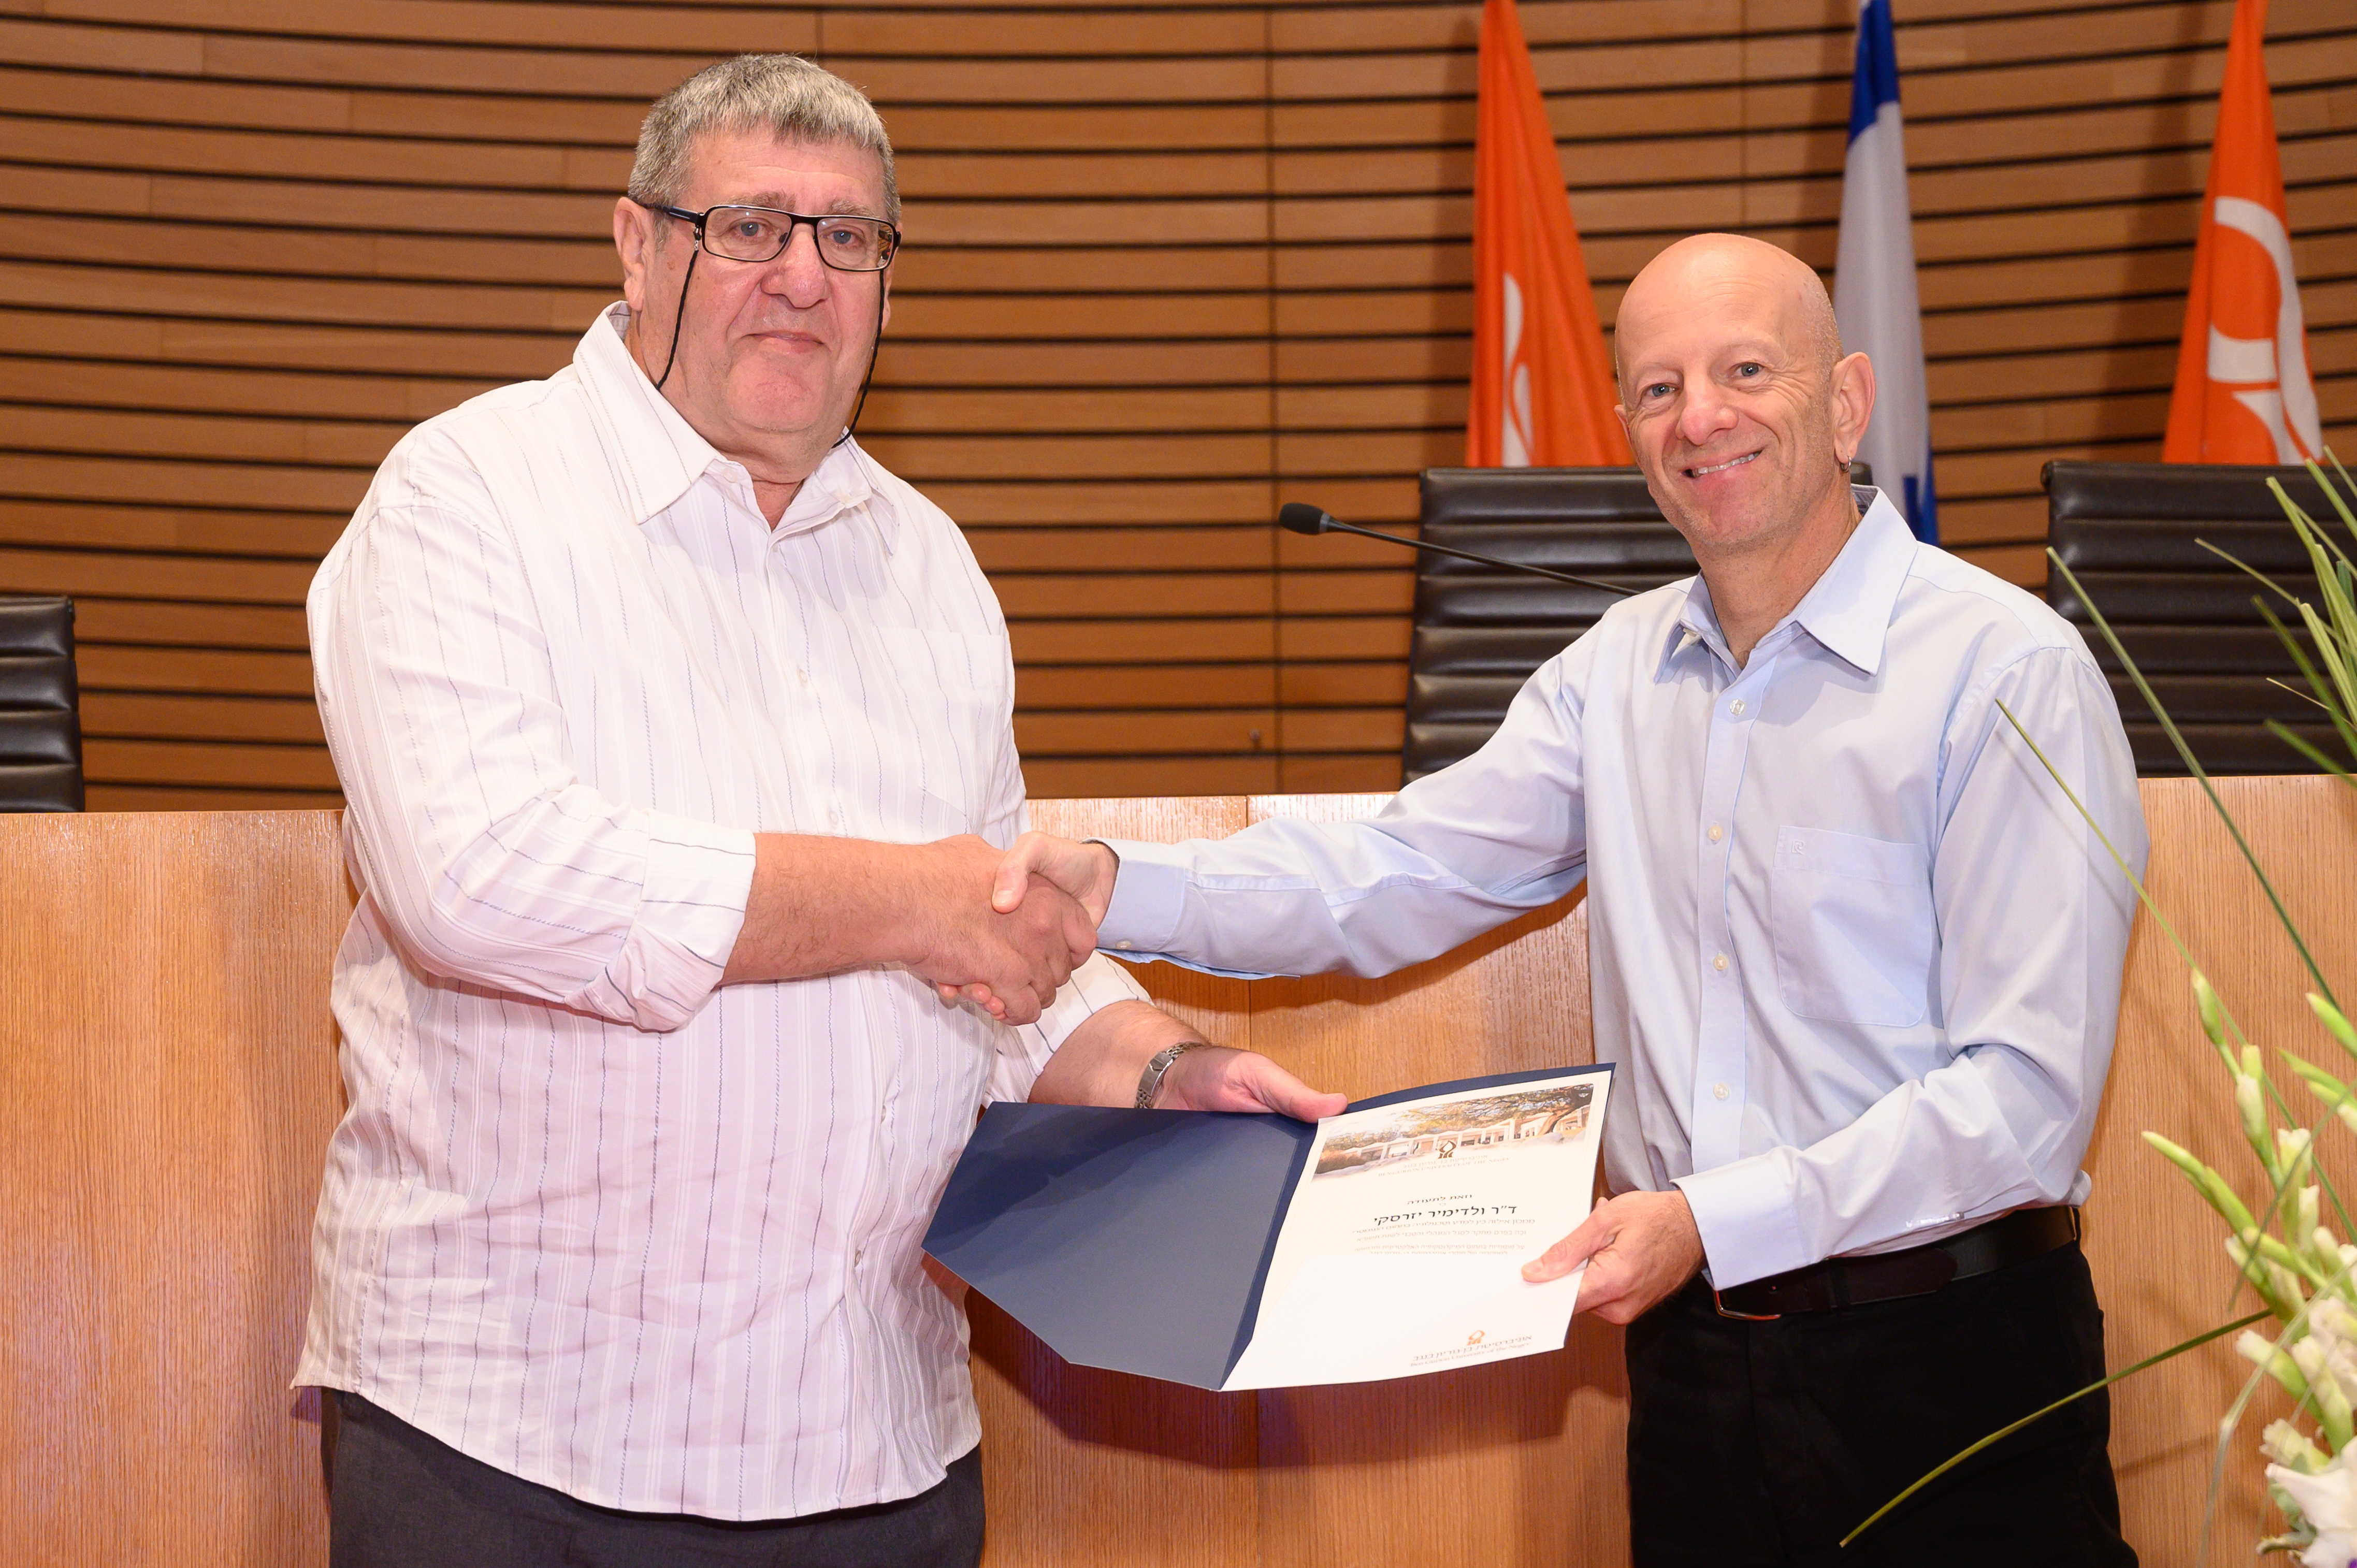 Dr. Vladimir Ezersky of the Ilsa Katz Institute of Science and Technology in the Nanometric Field won the Research Award of Administrative and Technical staff for his expertise in electron microscopy and his contribution to the research of Ben-Gurion University of the Negev scientists